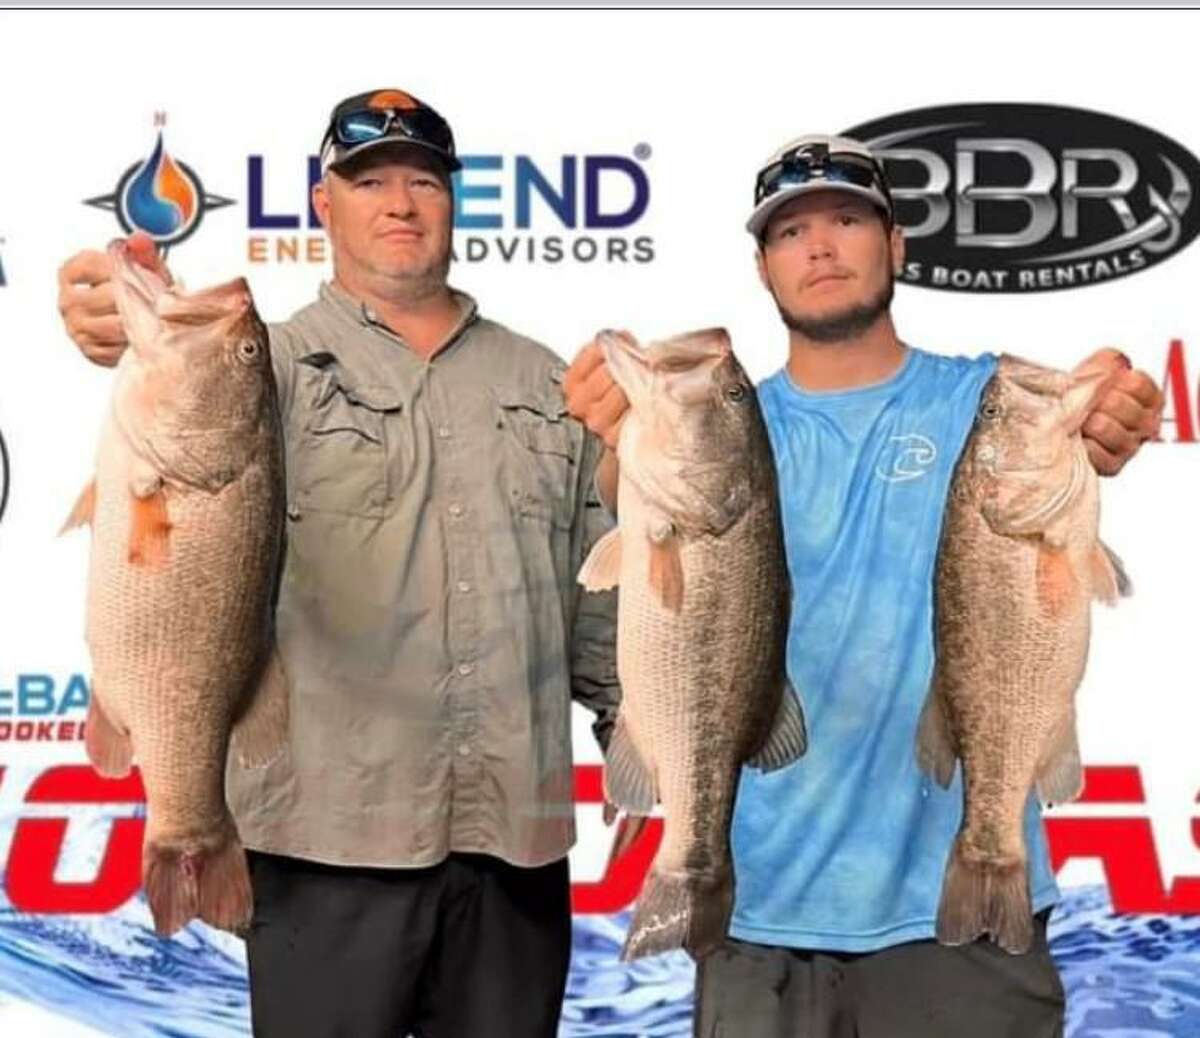 Jay and Jayce Garrison came in third place in the CONROEBASS Tuesday Tournament with a stringer weight of 14.62 pounds.